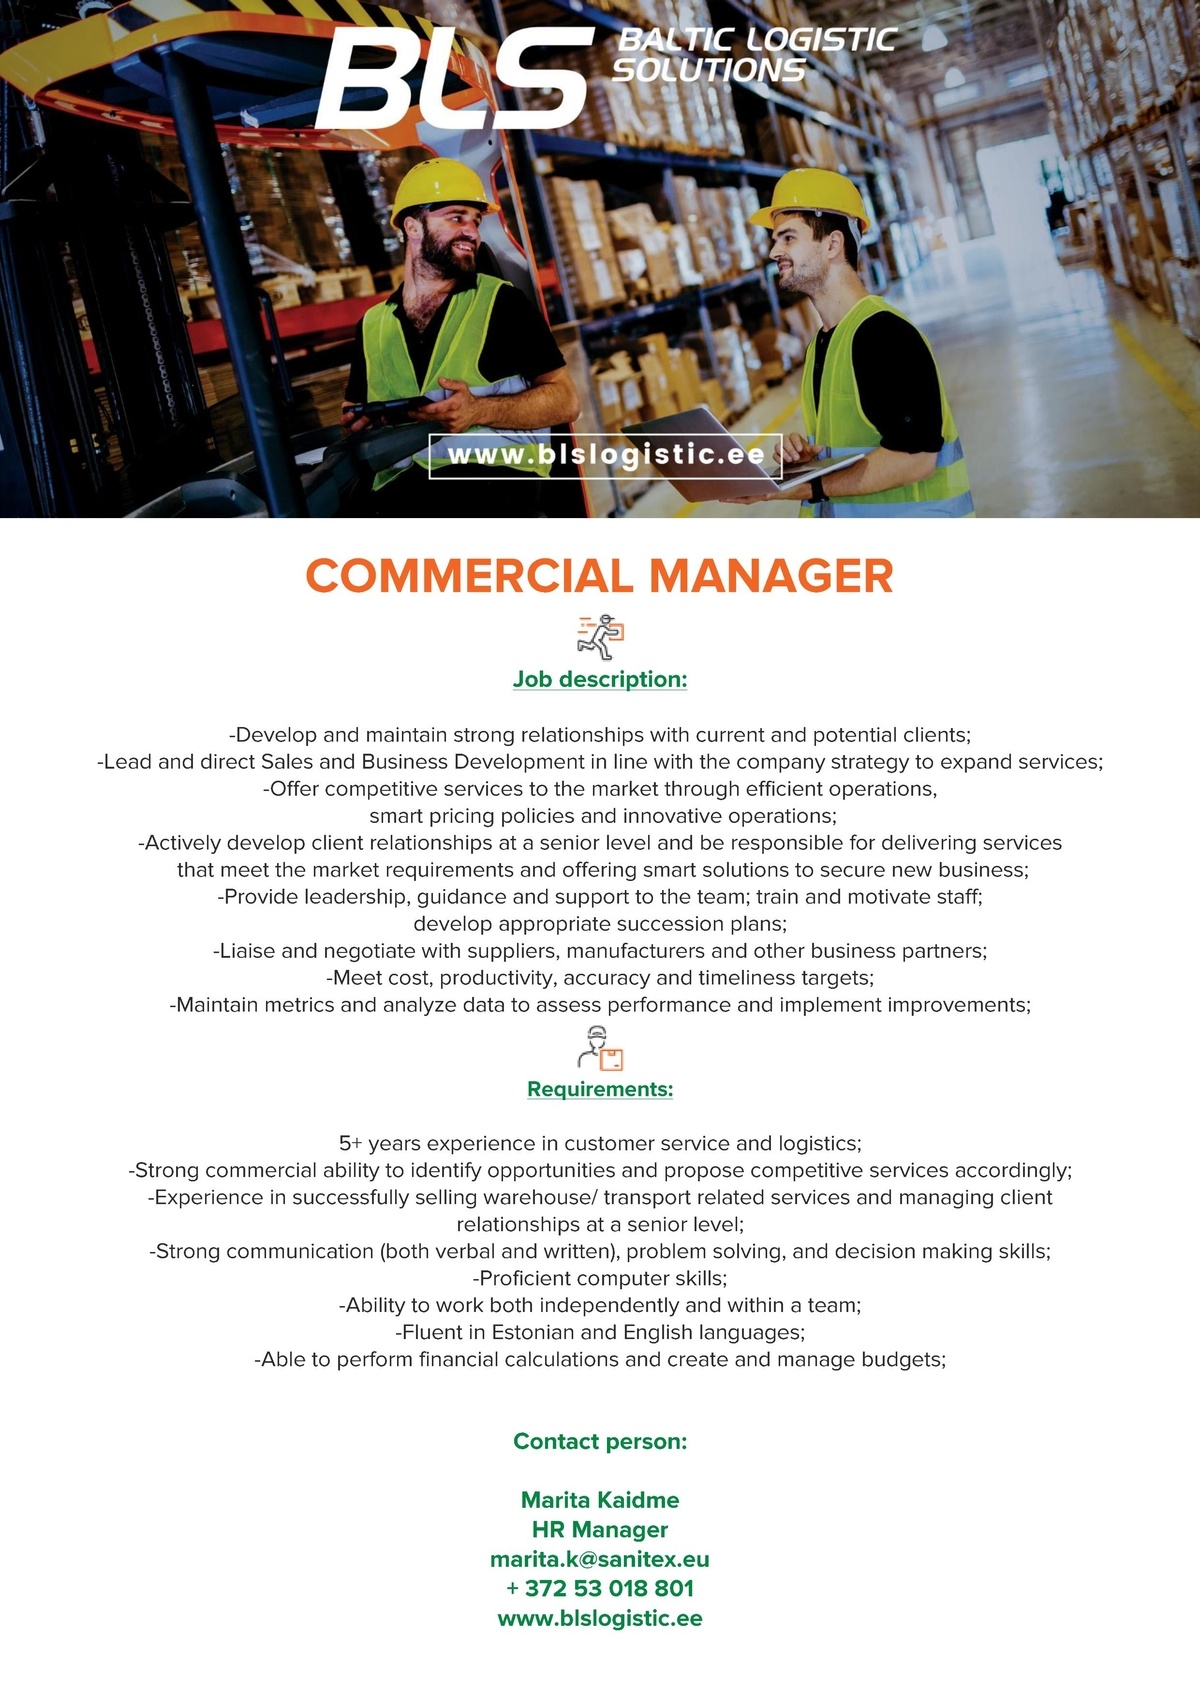 BALTIC LOGISTIC SOLUTIONS OÜ COMMERCIAL MANAGER